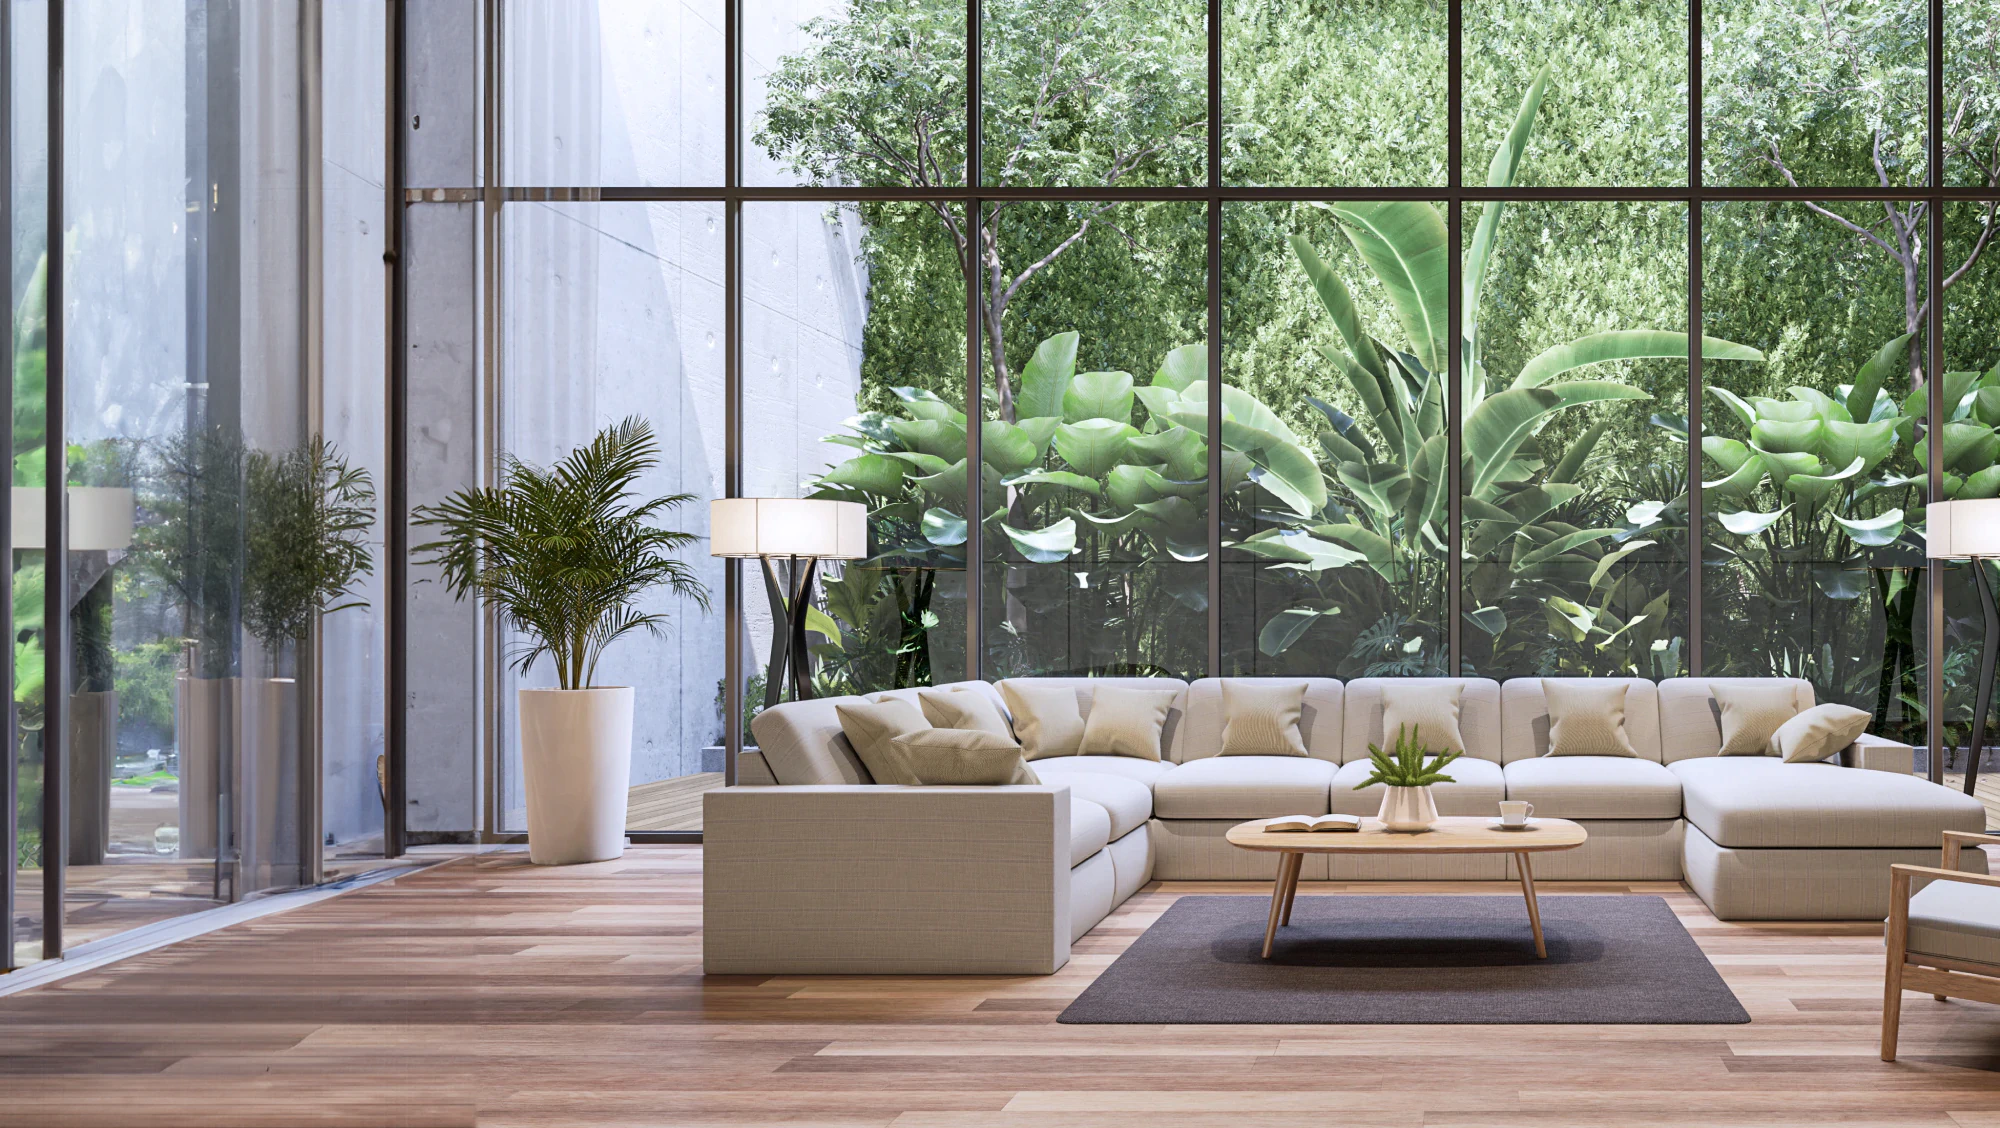 Modern living room with tropical style garden